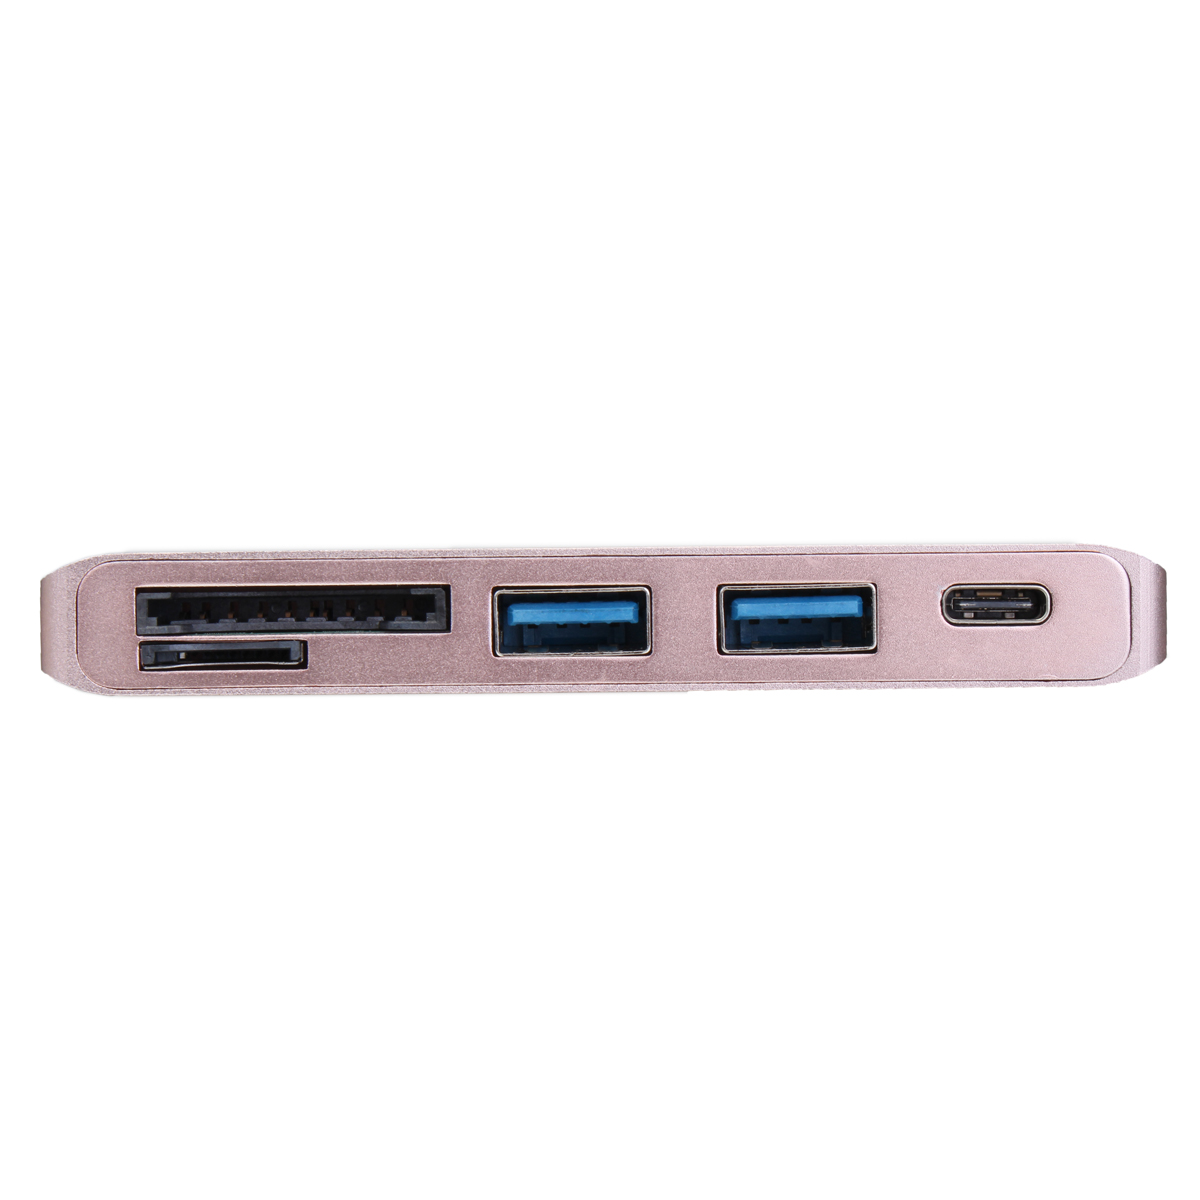 Multifunction USB Hub Type-C to Type-C USB 3.0 2Ports TF SD Card Reader for Laptop PC 13